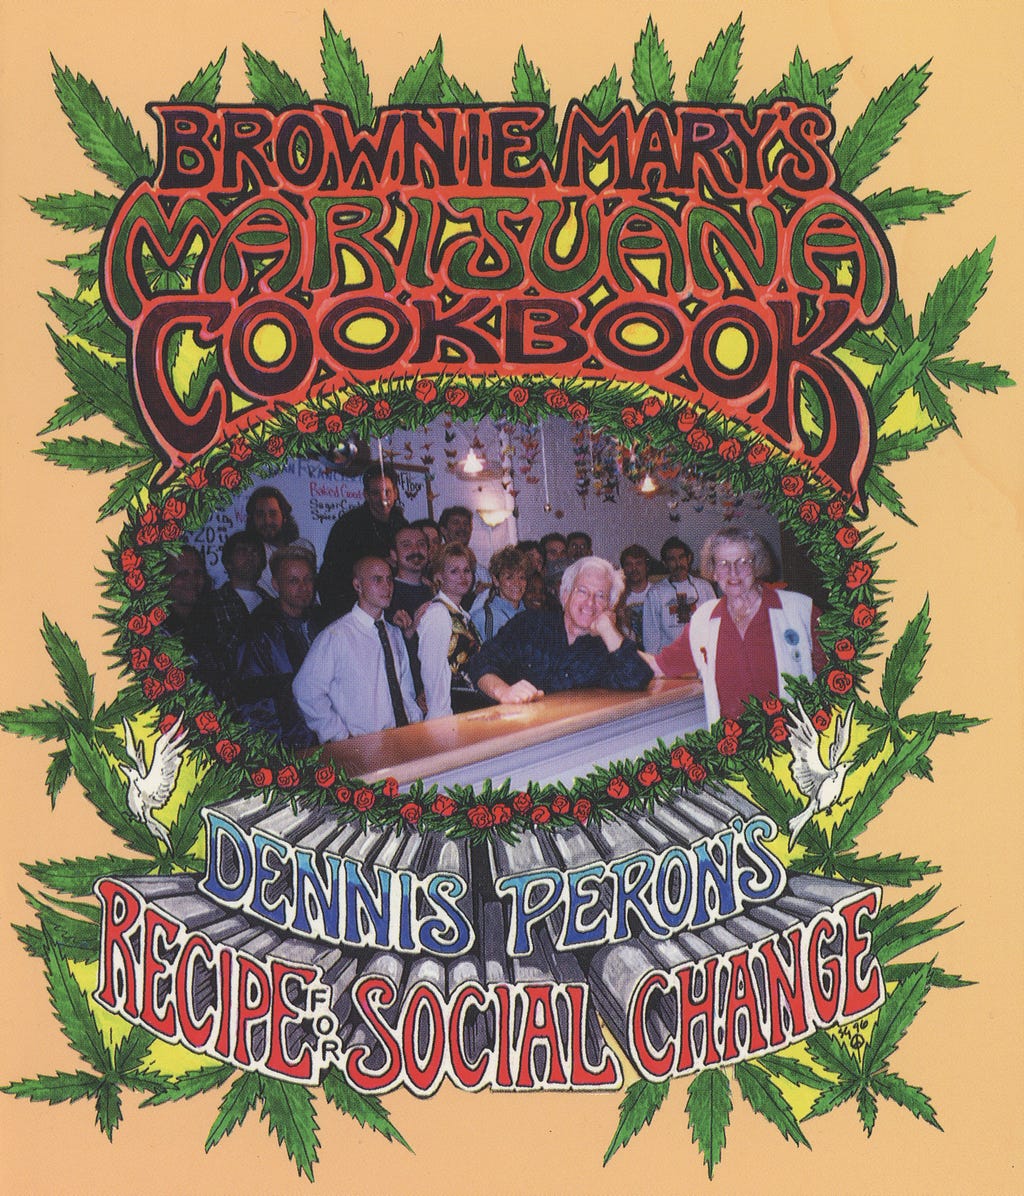 A beige book cover with the title written around an oval photo of Brownie Mary and Dennis Peron smiling, along with a large group of people in the background. Cannabis leaves decorate the lettering.